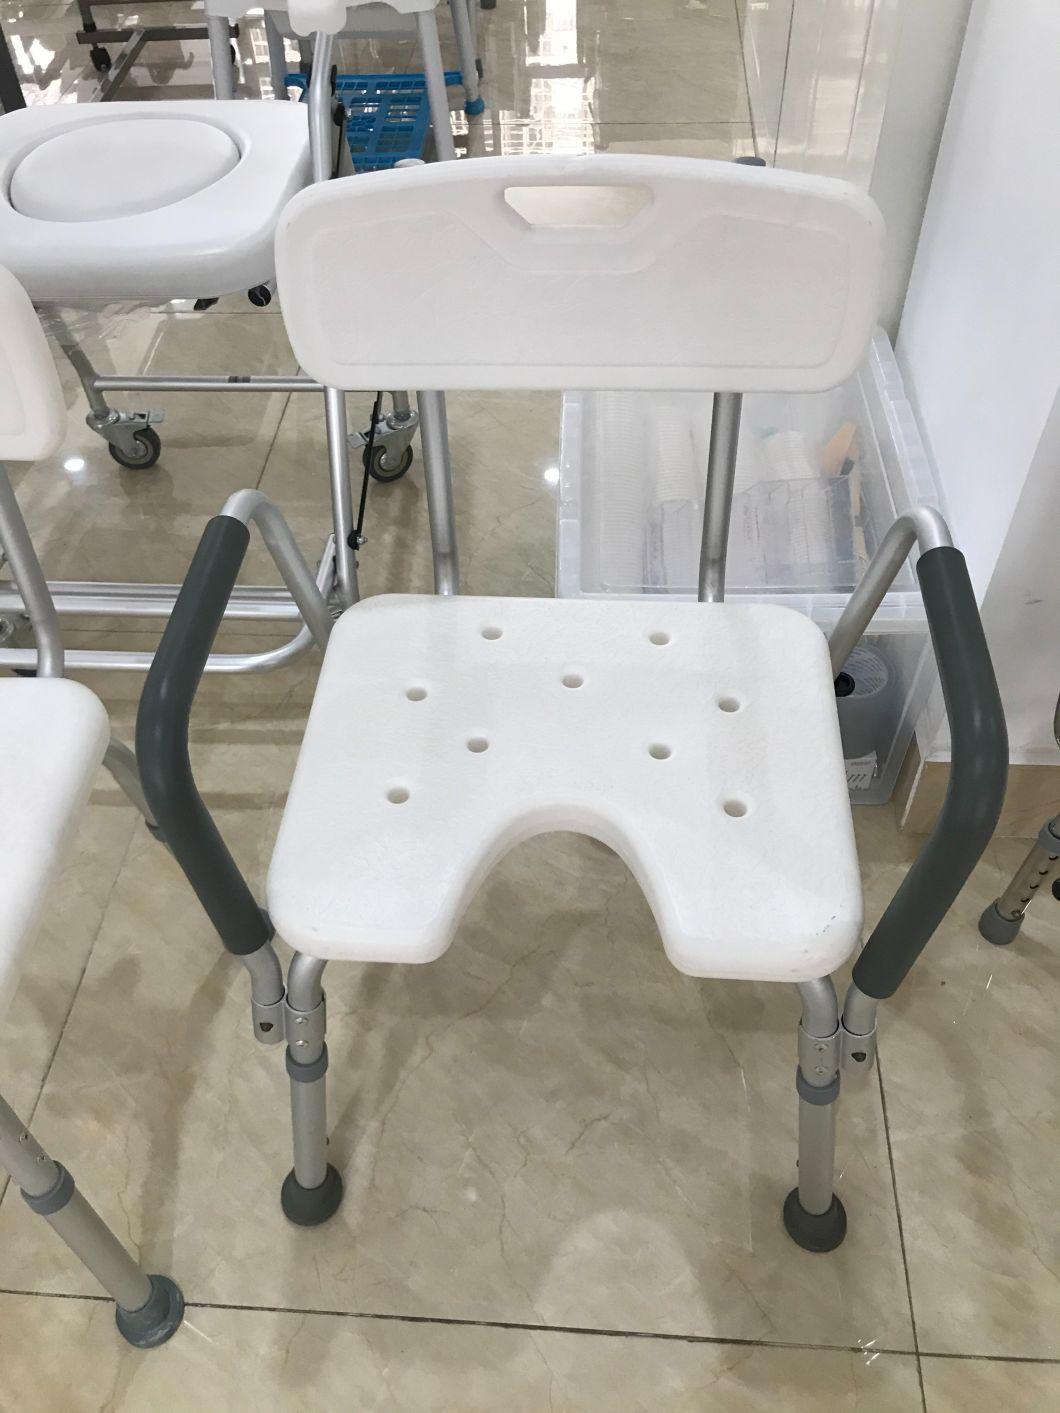 Brother Medical Aluminium Baby Shower Bath Chair for The Elderly